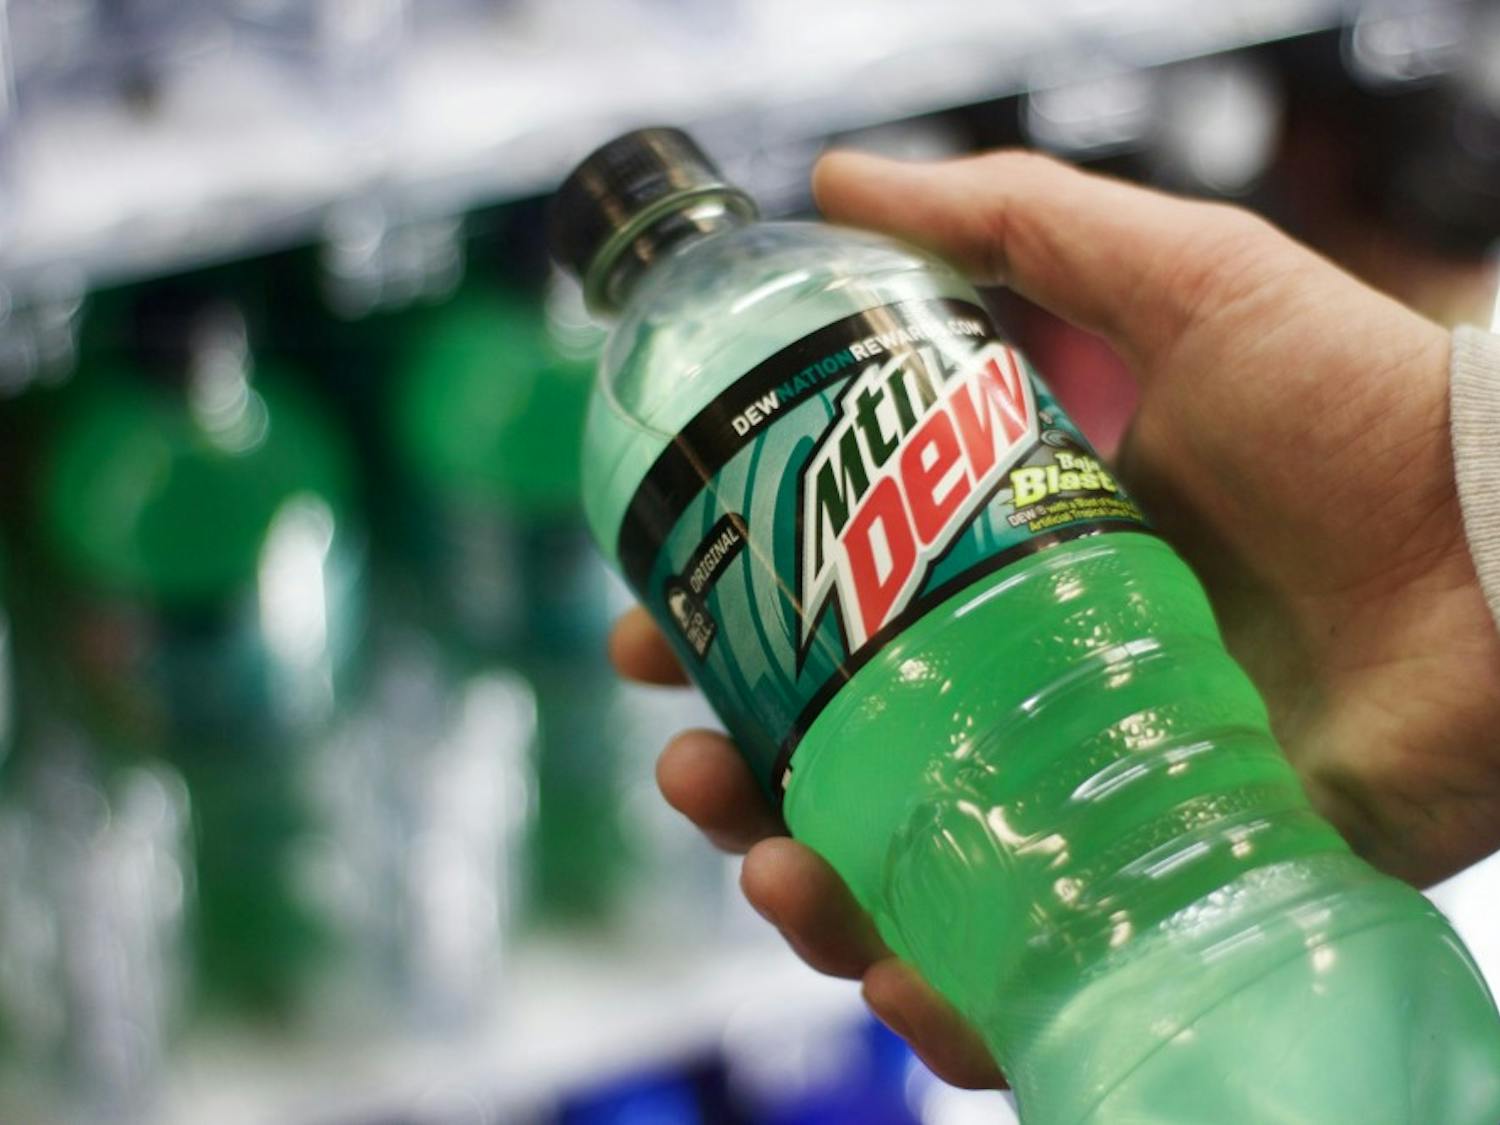 Campus Dining &amp; Shops introduced Mountain Dew Baja Blast in early March and says the product is "flying off" shelves